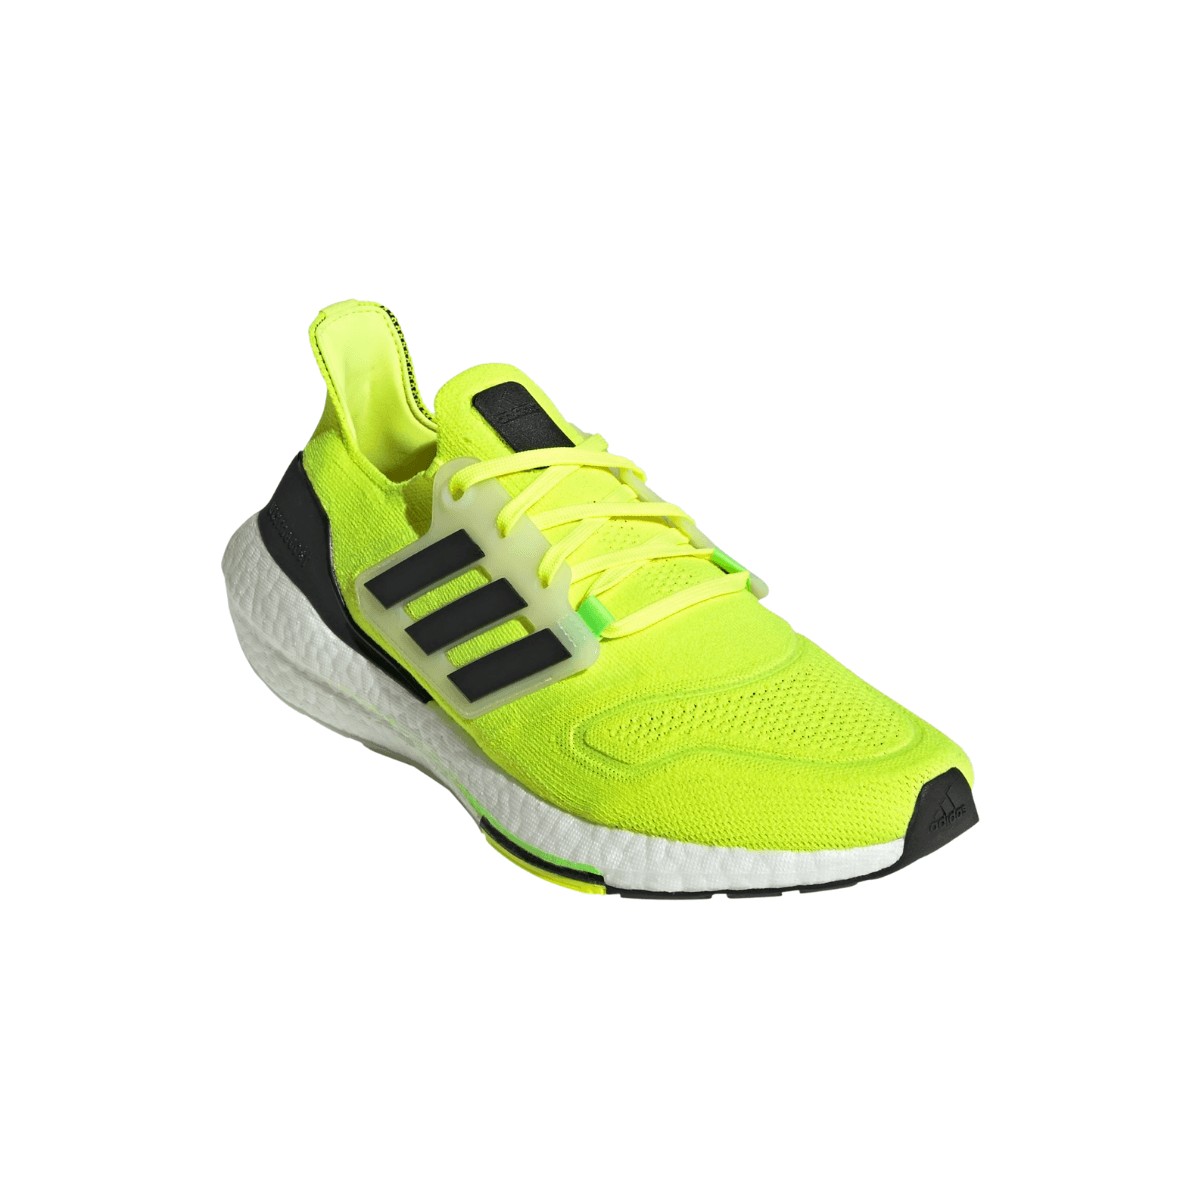 Infantil arco trompeta Buy Adidas Men's Ultraboost 22 Shoes At The Best Price